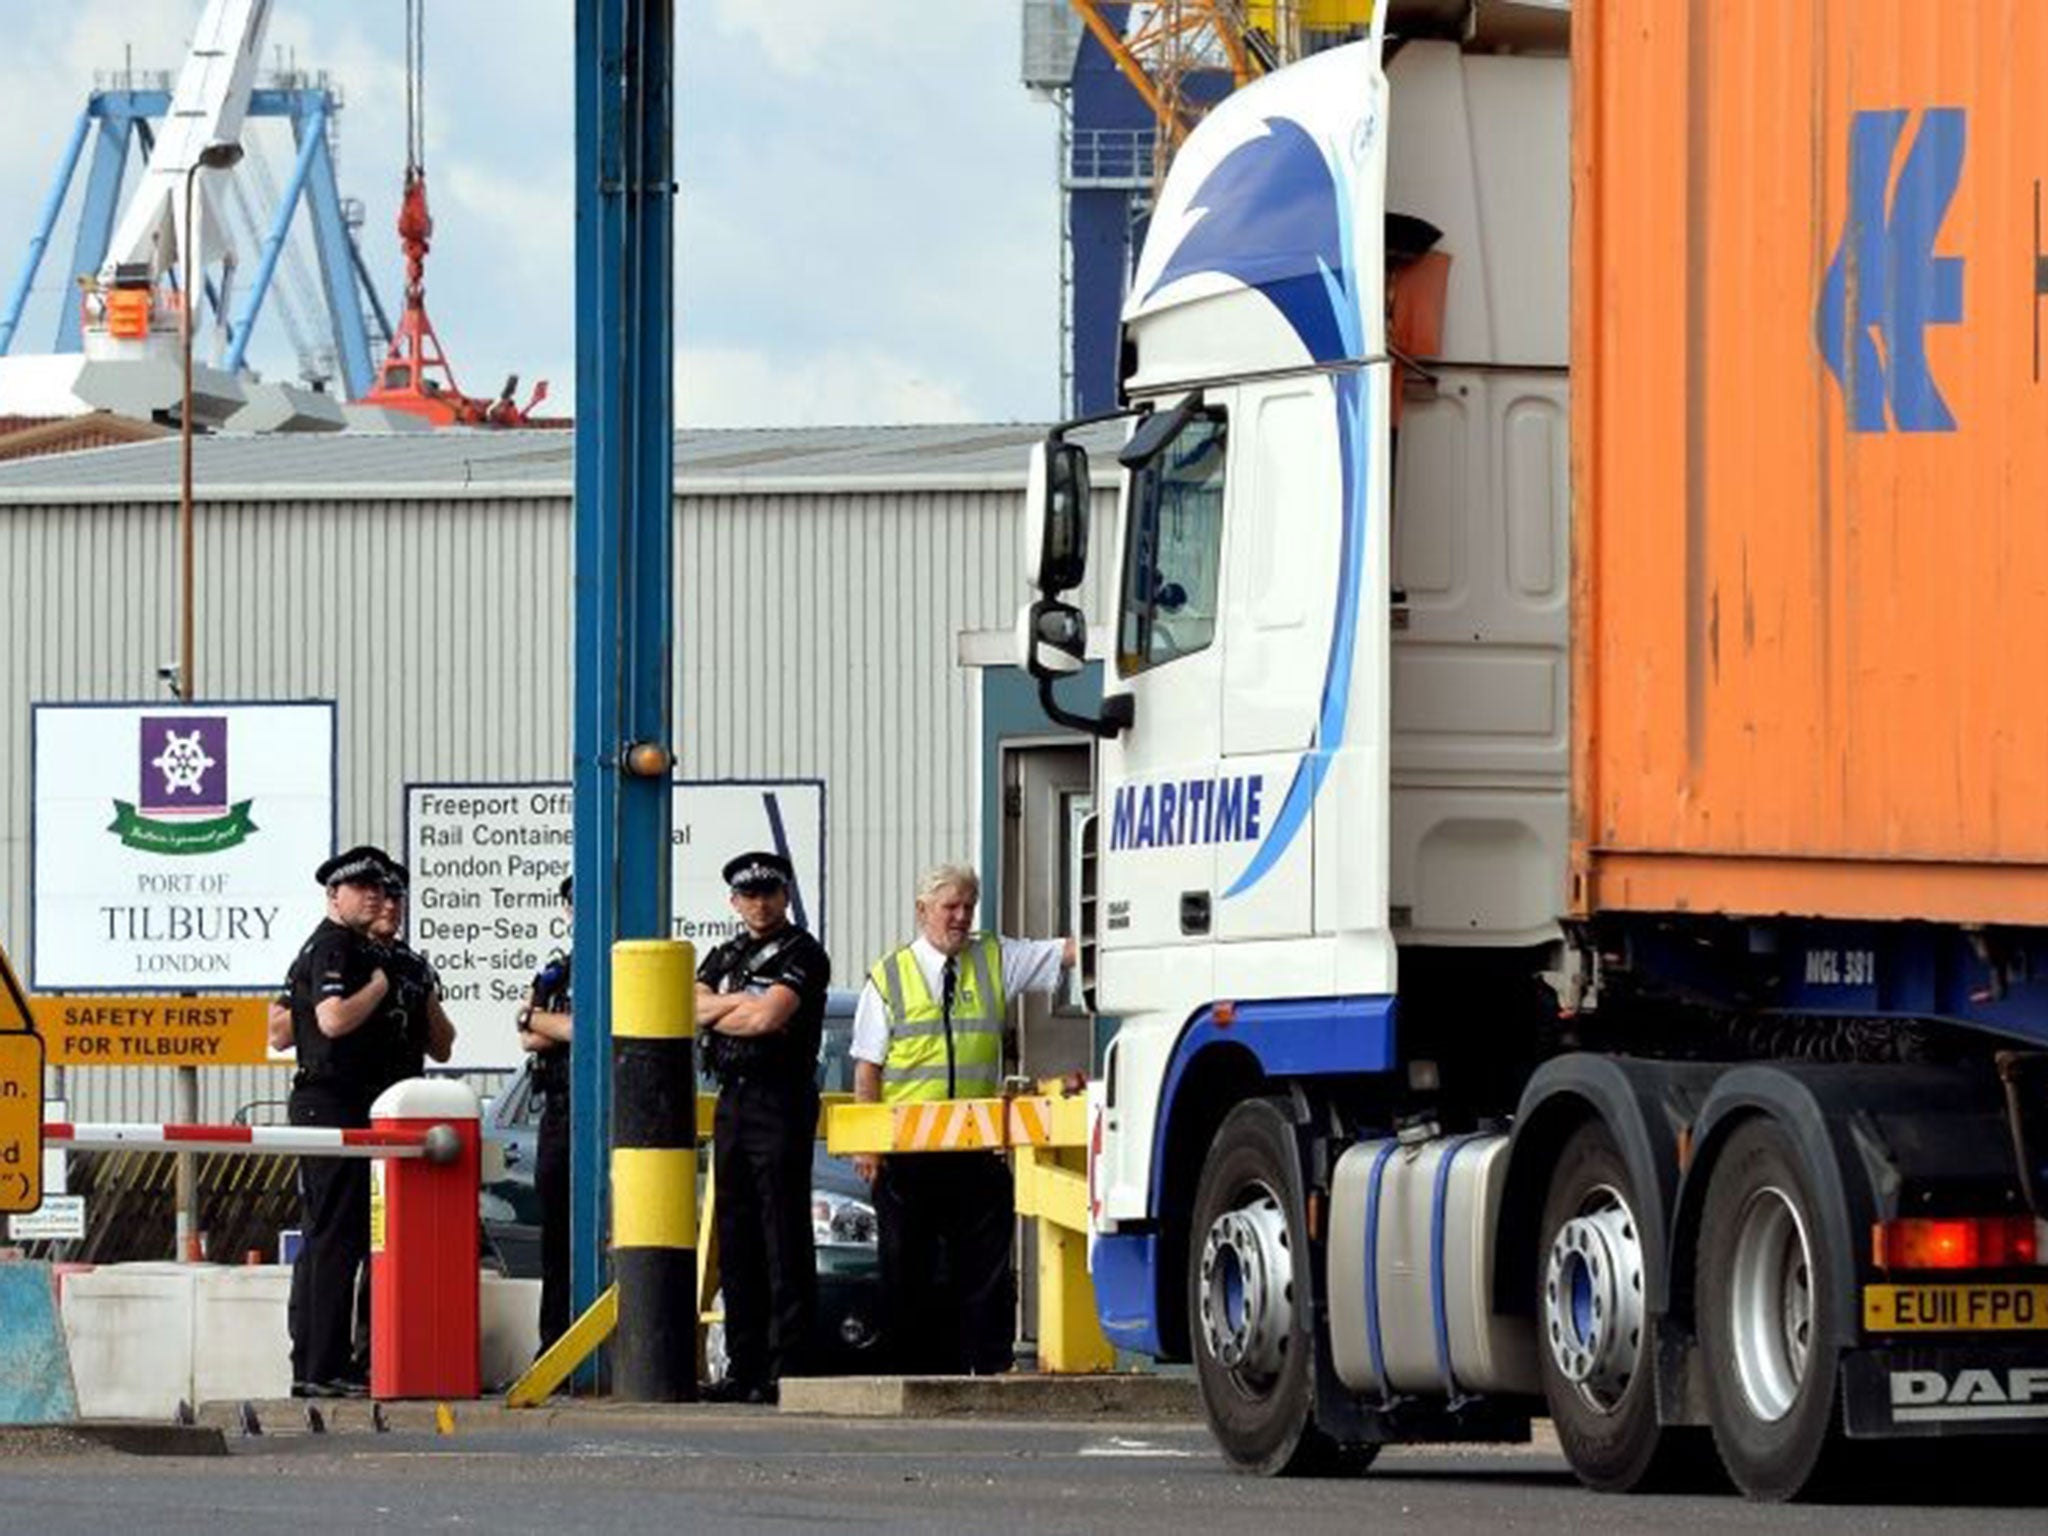 A group of Police Officers stand by the main entrance to Tilbury Docks in Essex, where a shipping container was found with 31 illegal immigrants inside